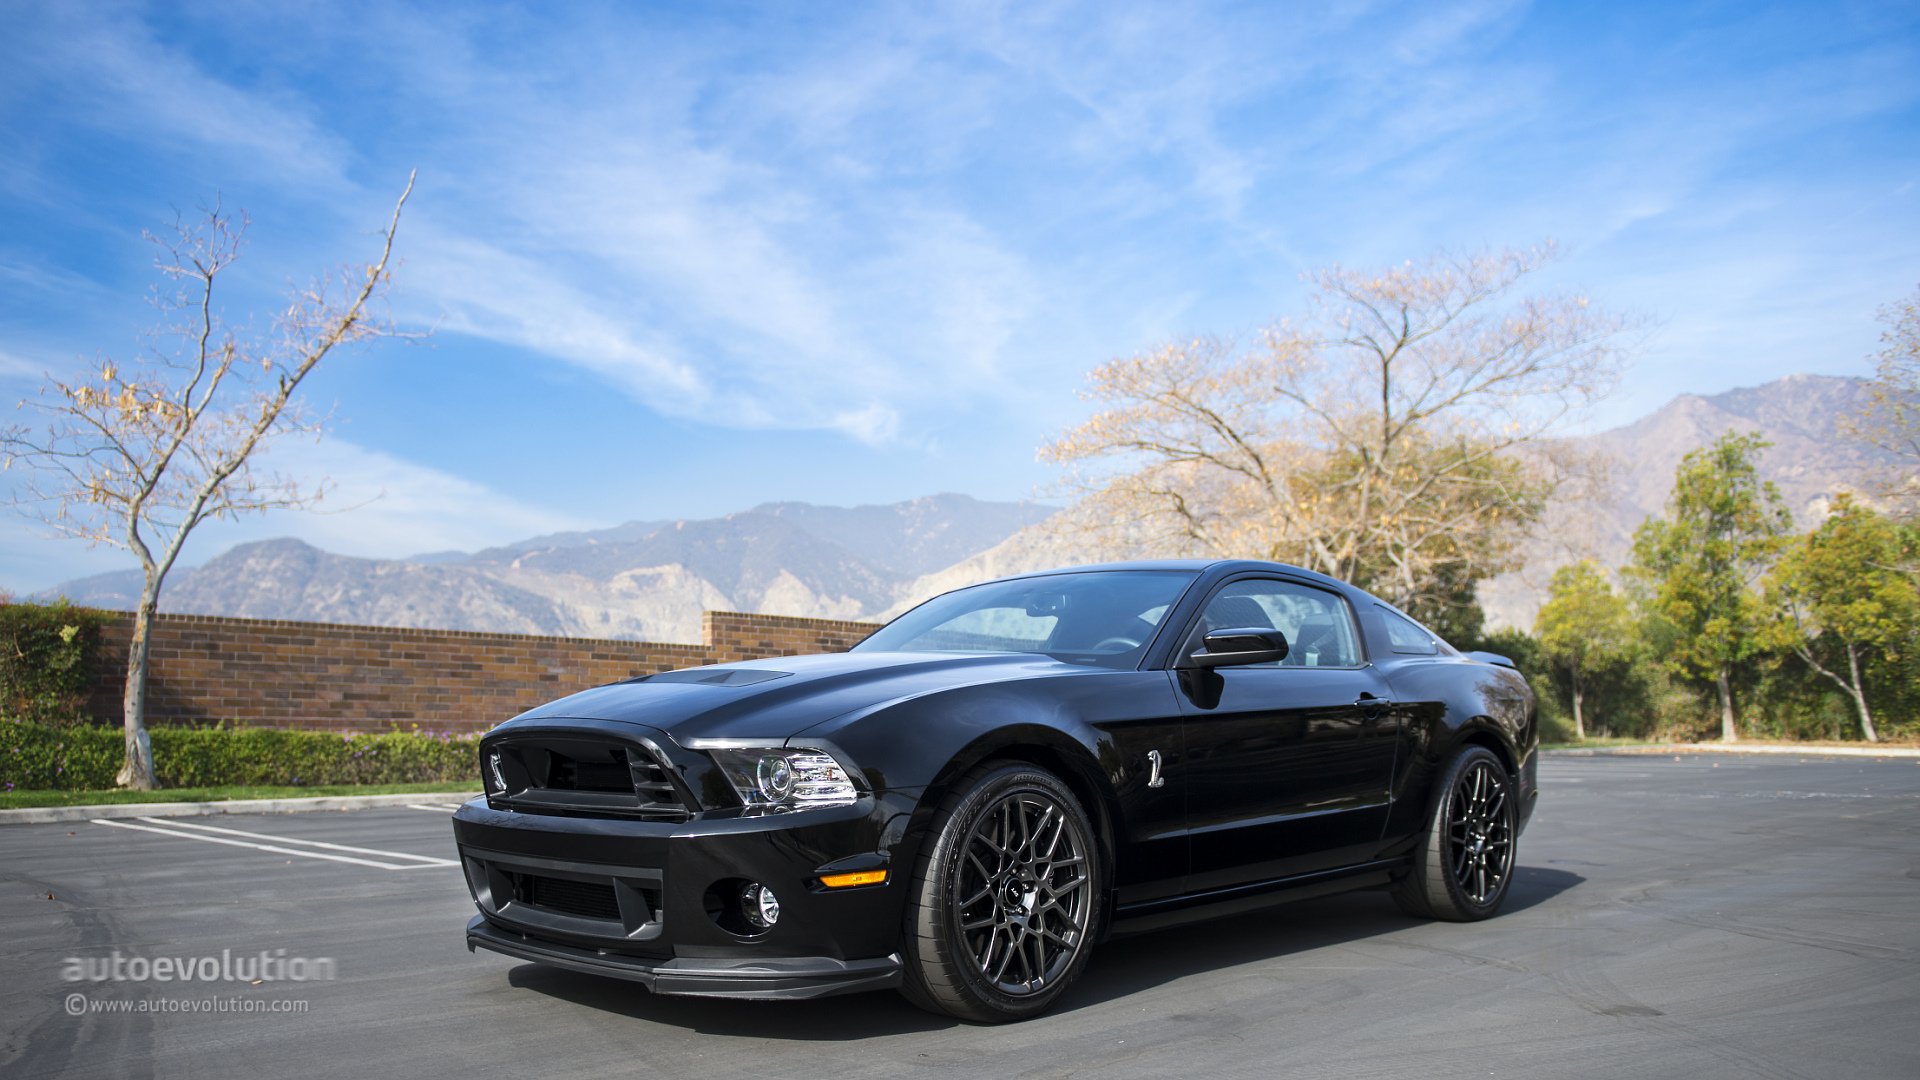 2014, Ford, Mustang, Shelby, Gt500, Coupe, Cars Wallpaper